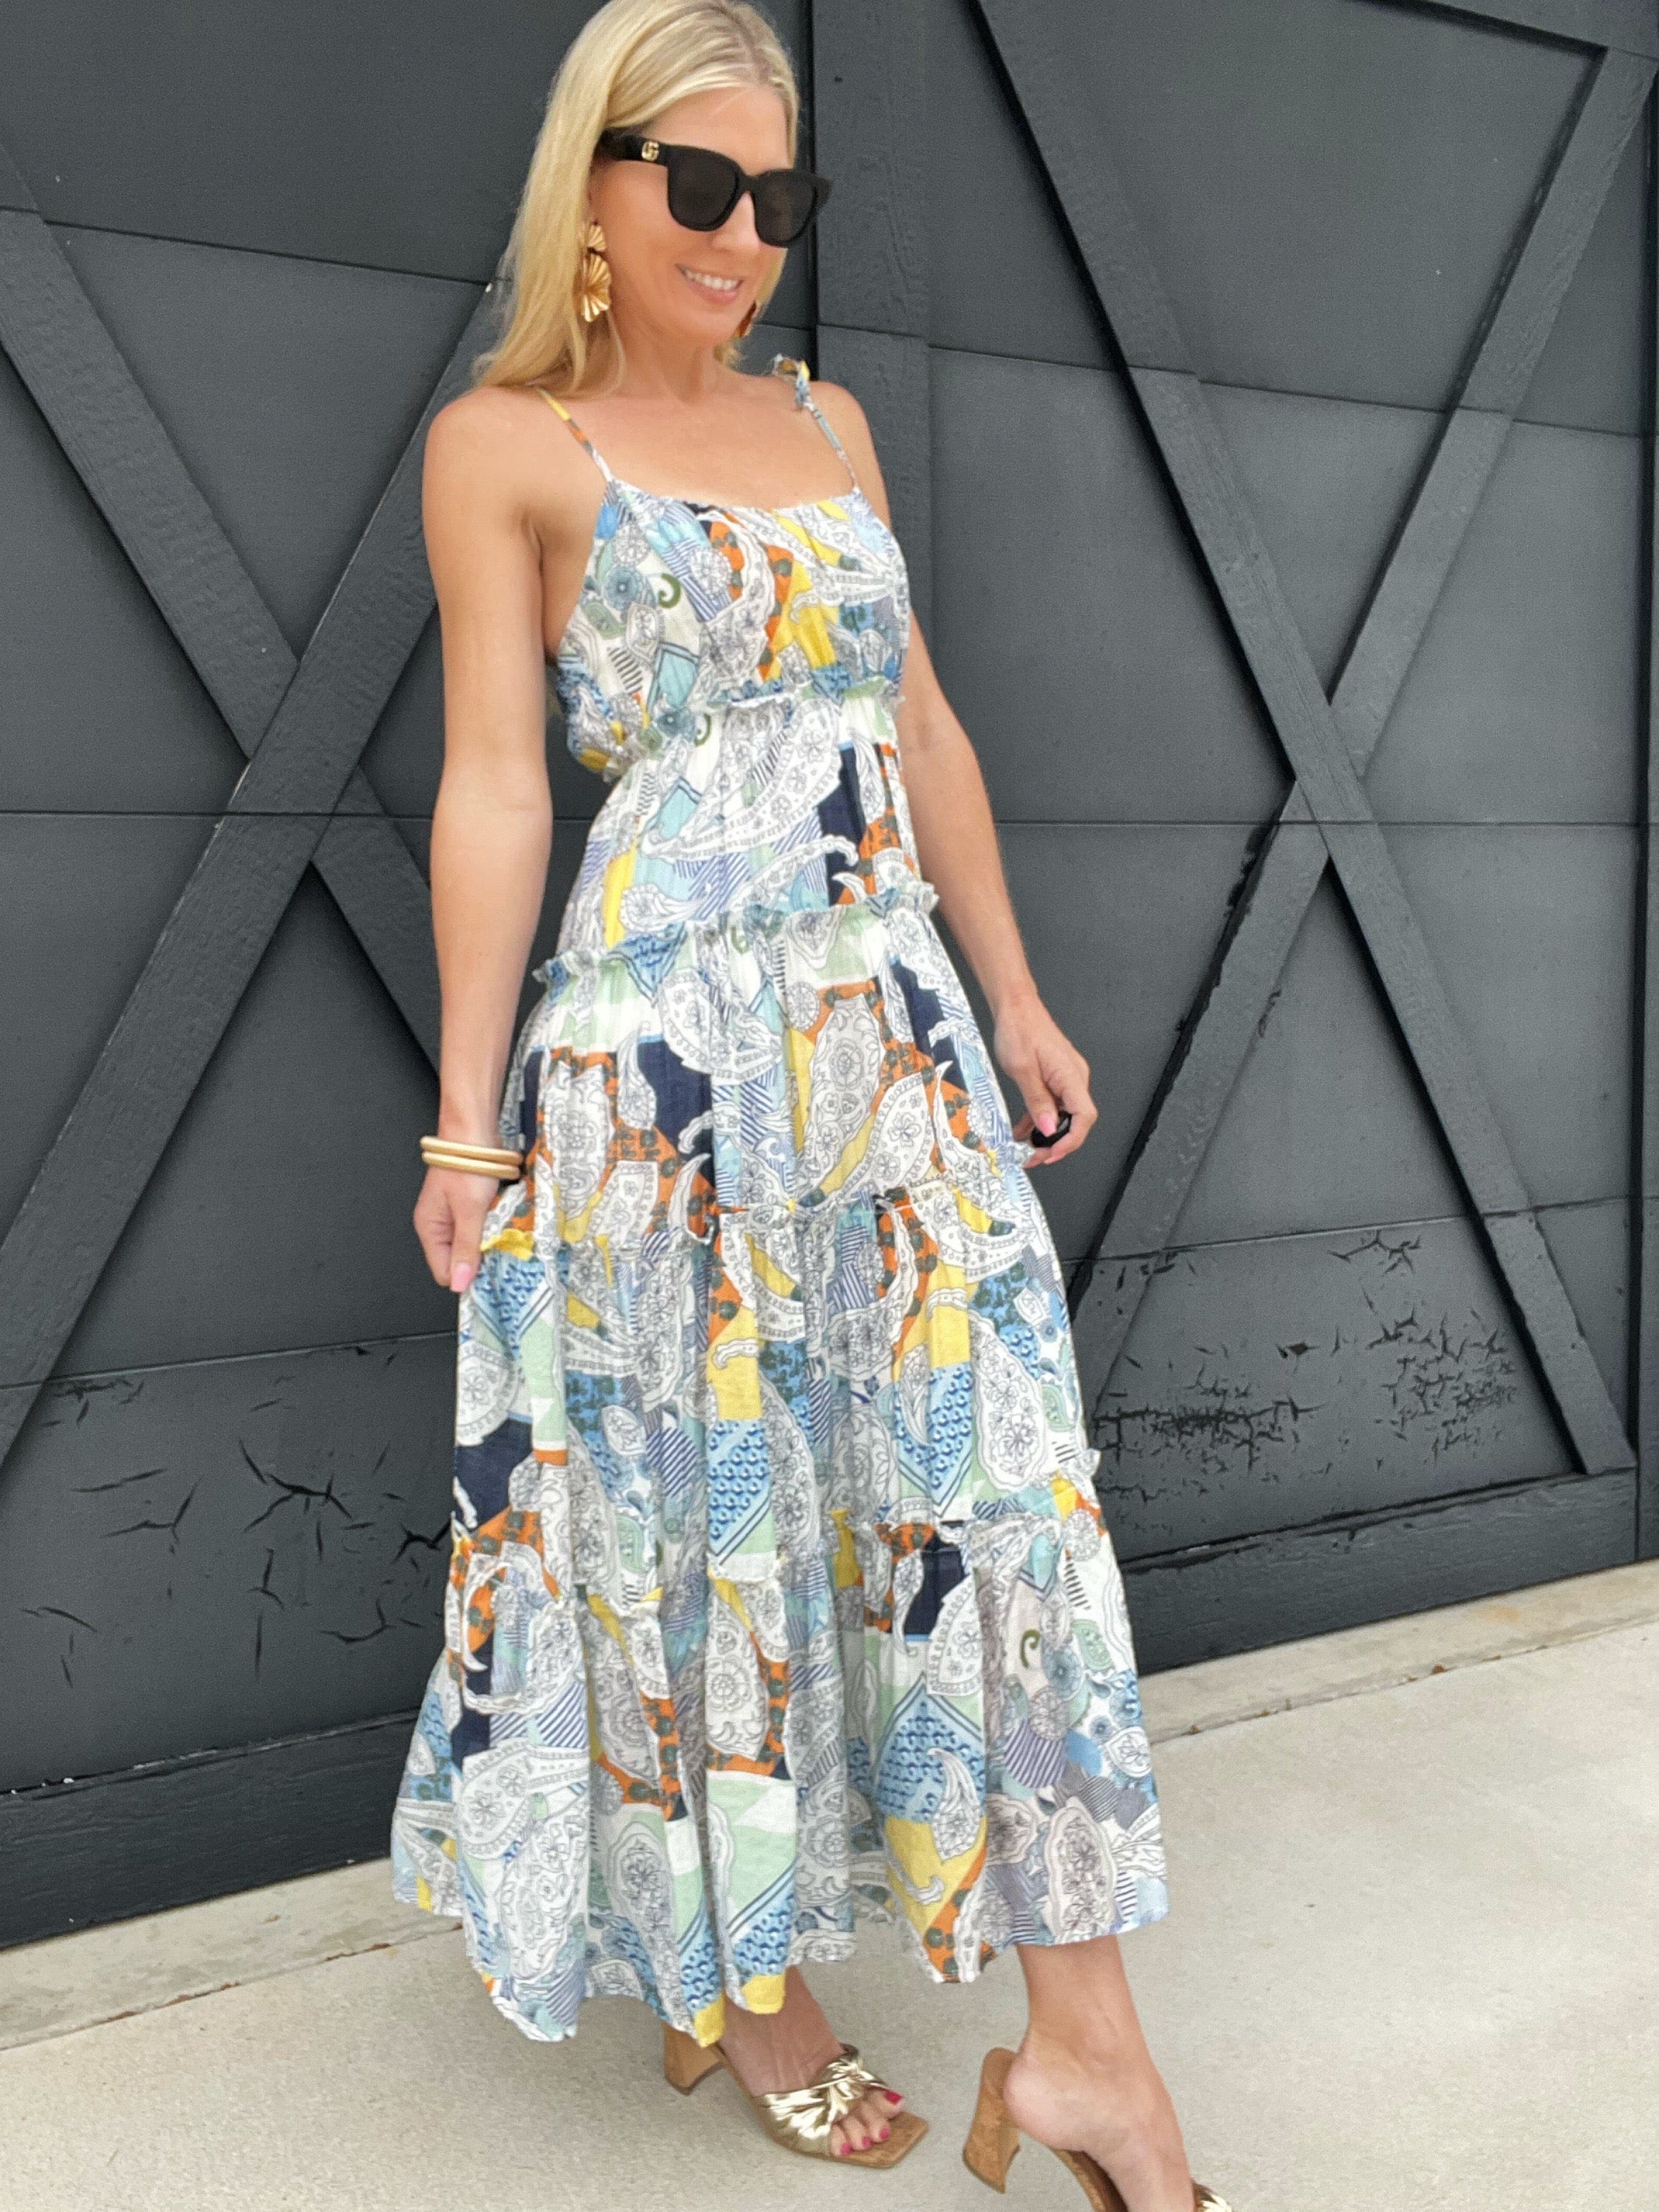 Paisley Floral Tiered Maxi Dress In Blue - Infinity Raine